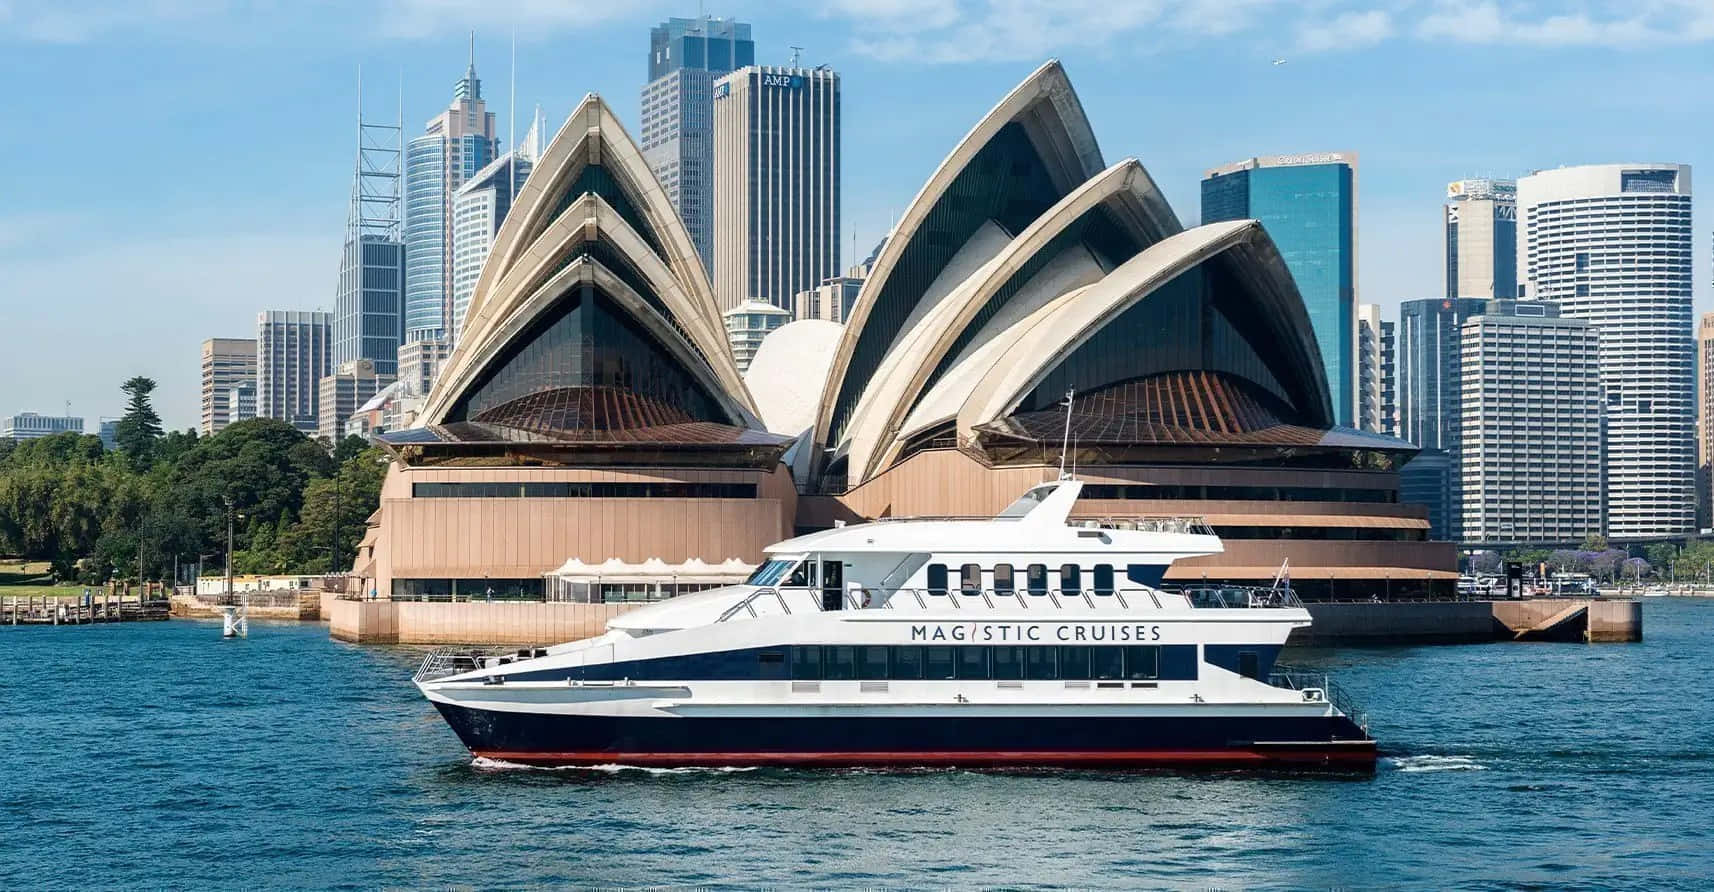 Sydney Harbour Cruisewith Opera House View Wallpaper